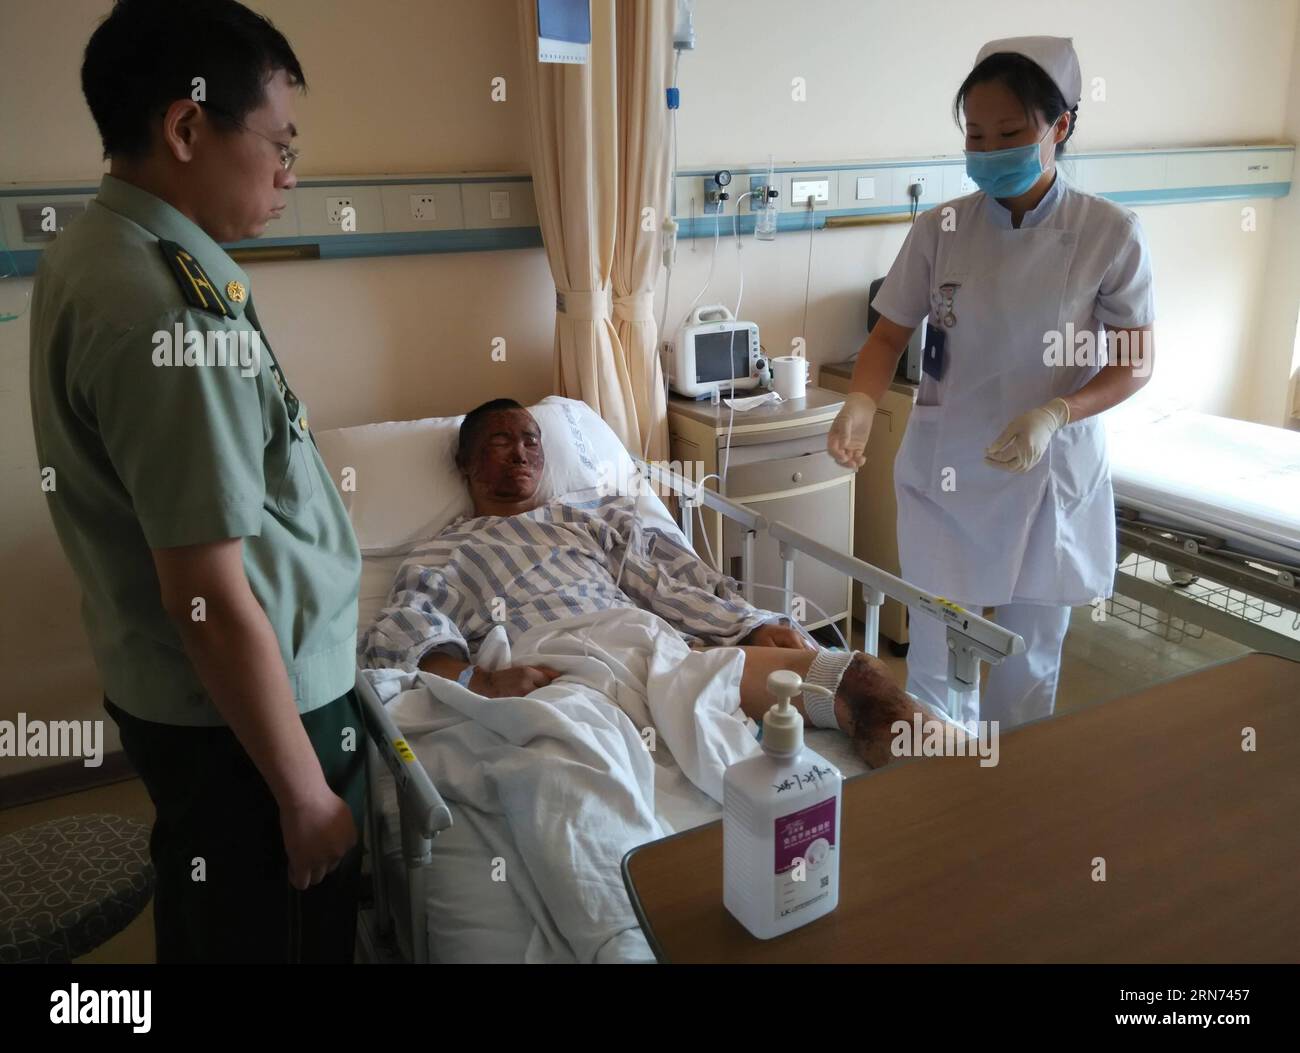 (150816) -- TIANJIN, Aug. 16, 2015 -- A nurse takes care of the rescued firefighter Zhou Ti in Taida Hospital in north China s Tianjin Municipality, Aug. 16, 2015. Zhou has recovered smoothly and can have slop for food on Sunday. ) (zwx) CHINA-TIANJIN-EXPLOSION-RESCUED FIREFIGHTER(CN) LvxDong PUBLICATIONxNOTxINxCHN   150816 Tianjin Aug 16 2015 a Nurse Takes Care of The Rescued Fire Fighter Zhou Ti in  Hospital in North China S Tianjin Municipality Aug 16 2015 Zhou has recovered smoothly and CAN have slop for Food ON Sunday zwx China Tianjin Explosion Rescued Fire Fighter CN  PUBLICATIONxNOTxIN Stock Photo